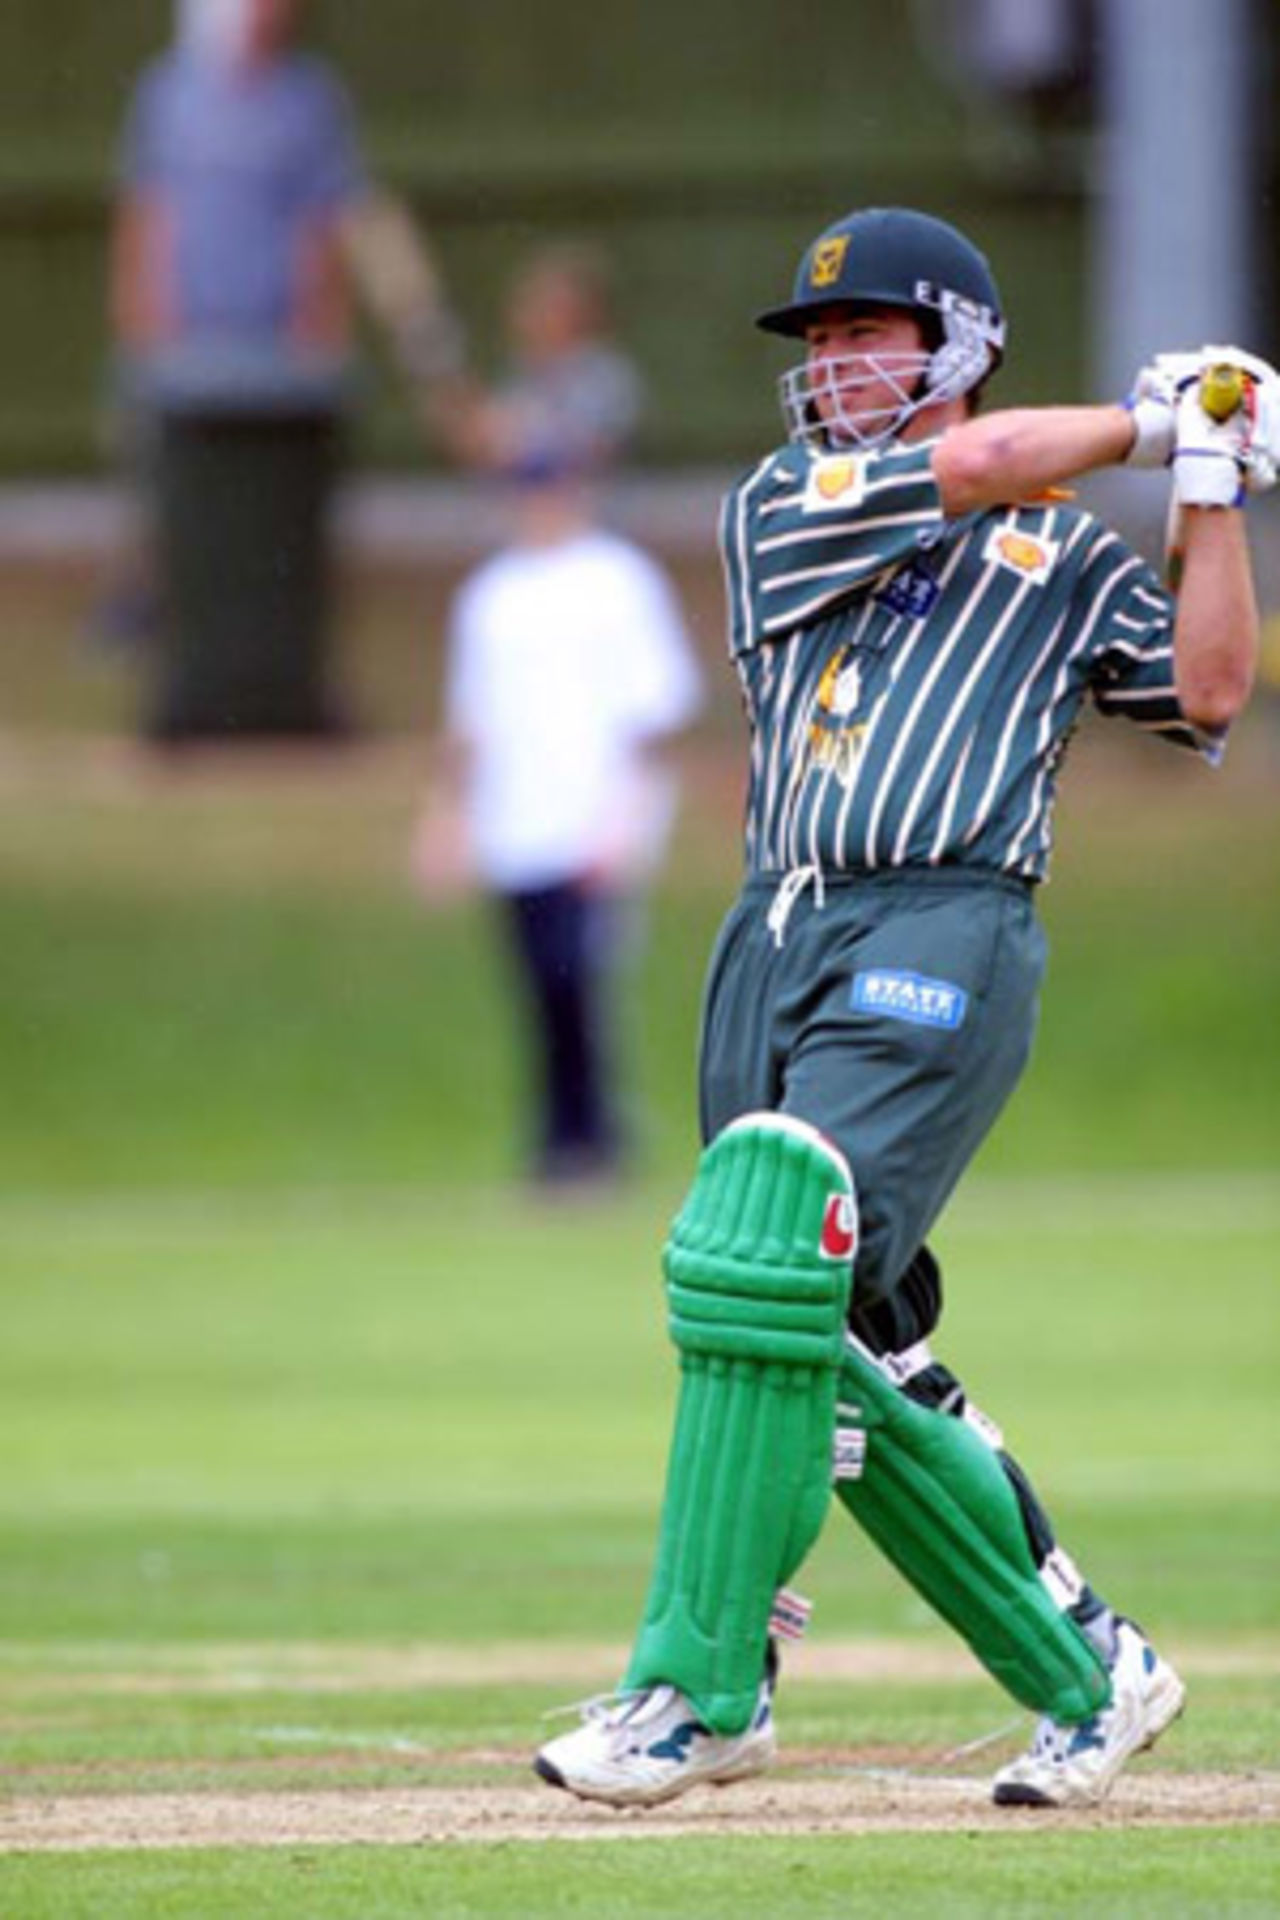 Central Districts opening batsman David Kelly stands tall to hit aerially down the ground, Shell Cup: Auckland v Central Districts at Eden Park Outer Oval, Auckland, 16 January 2001